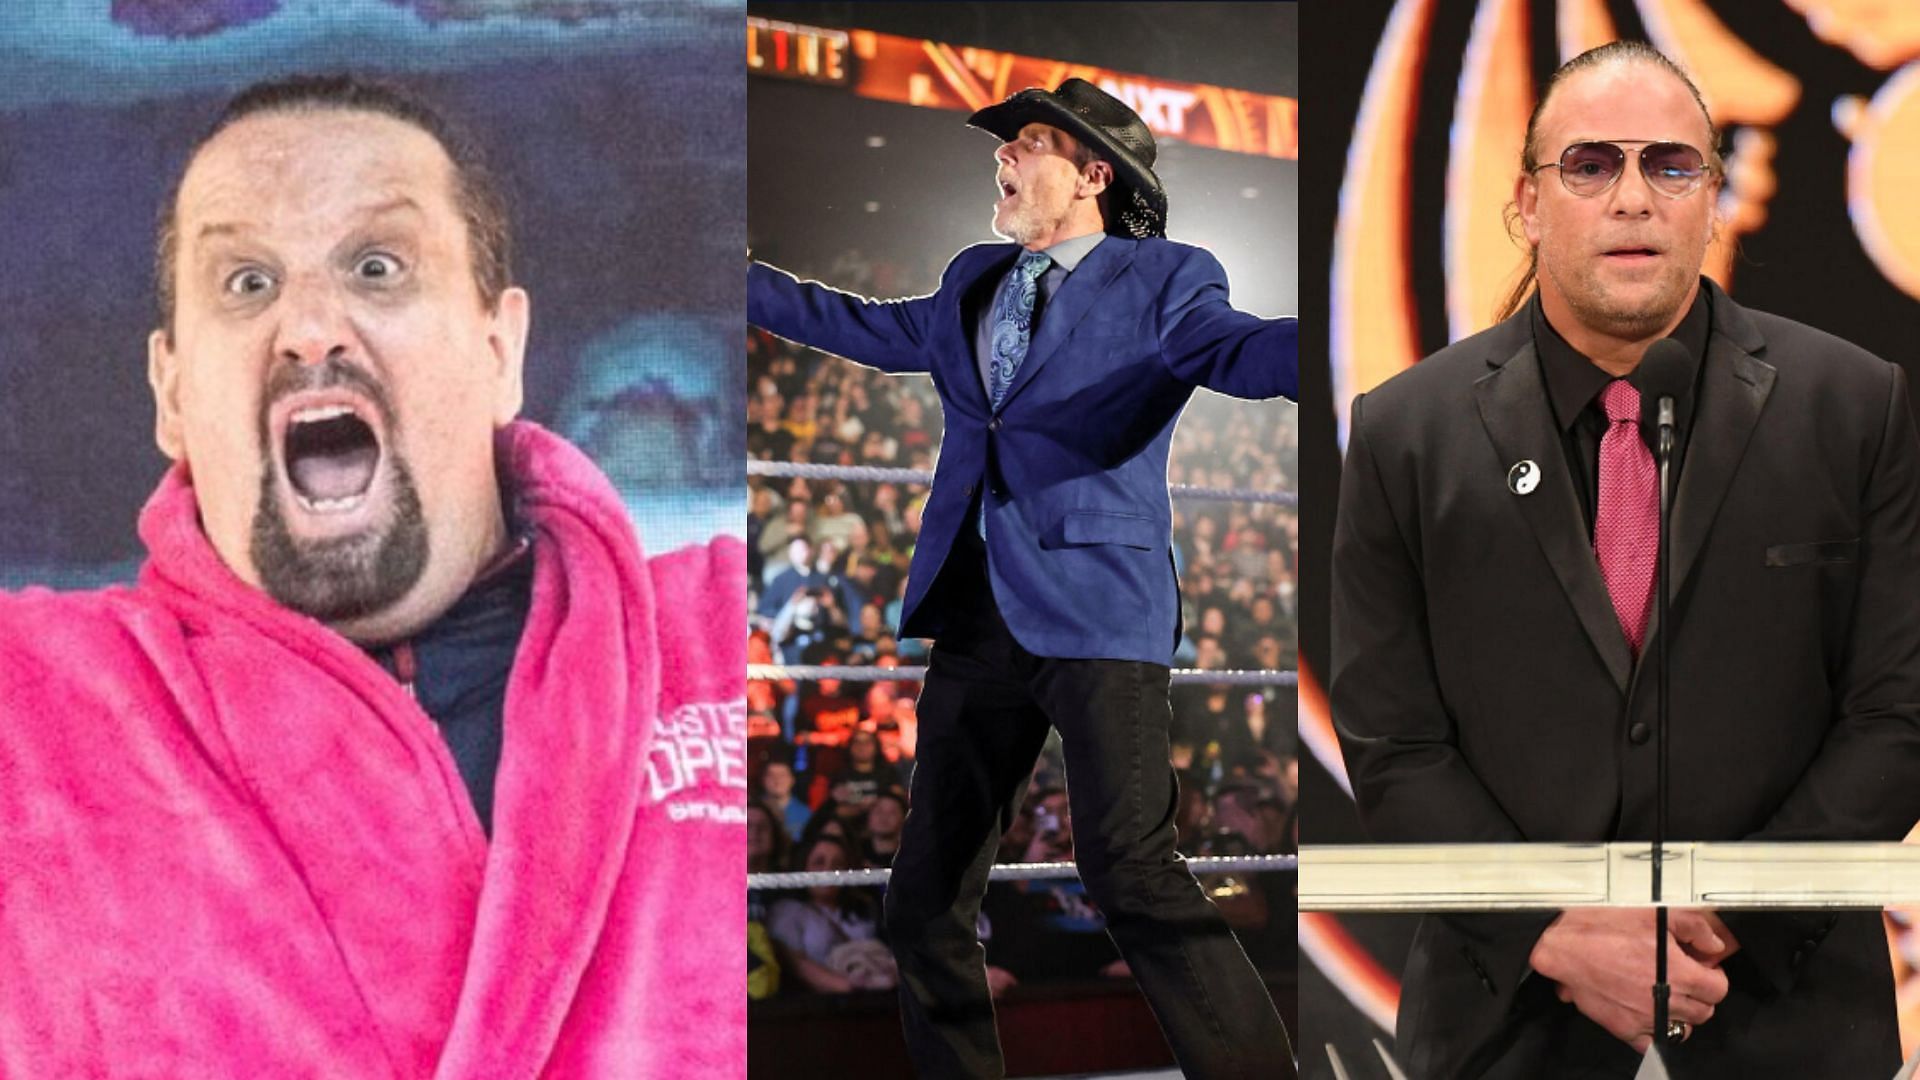 Tommy Dreamer is a WWE and ECW veteran [Image Credits: Dreamer